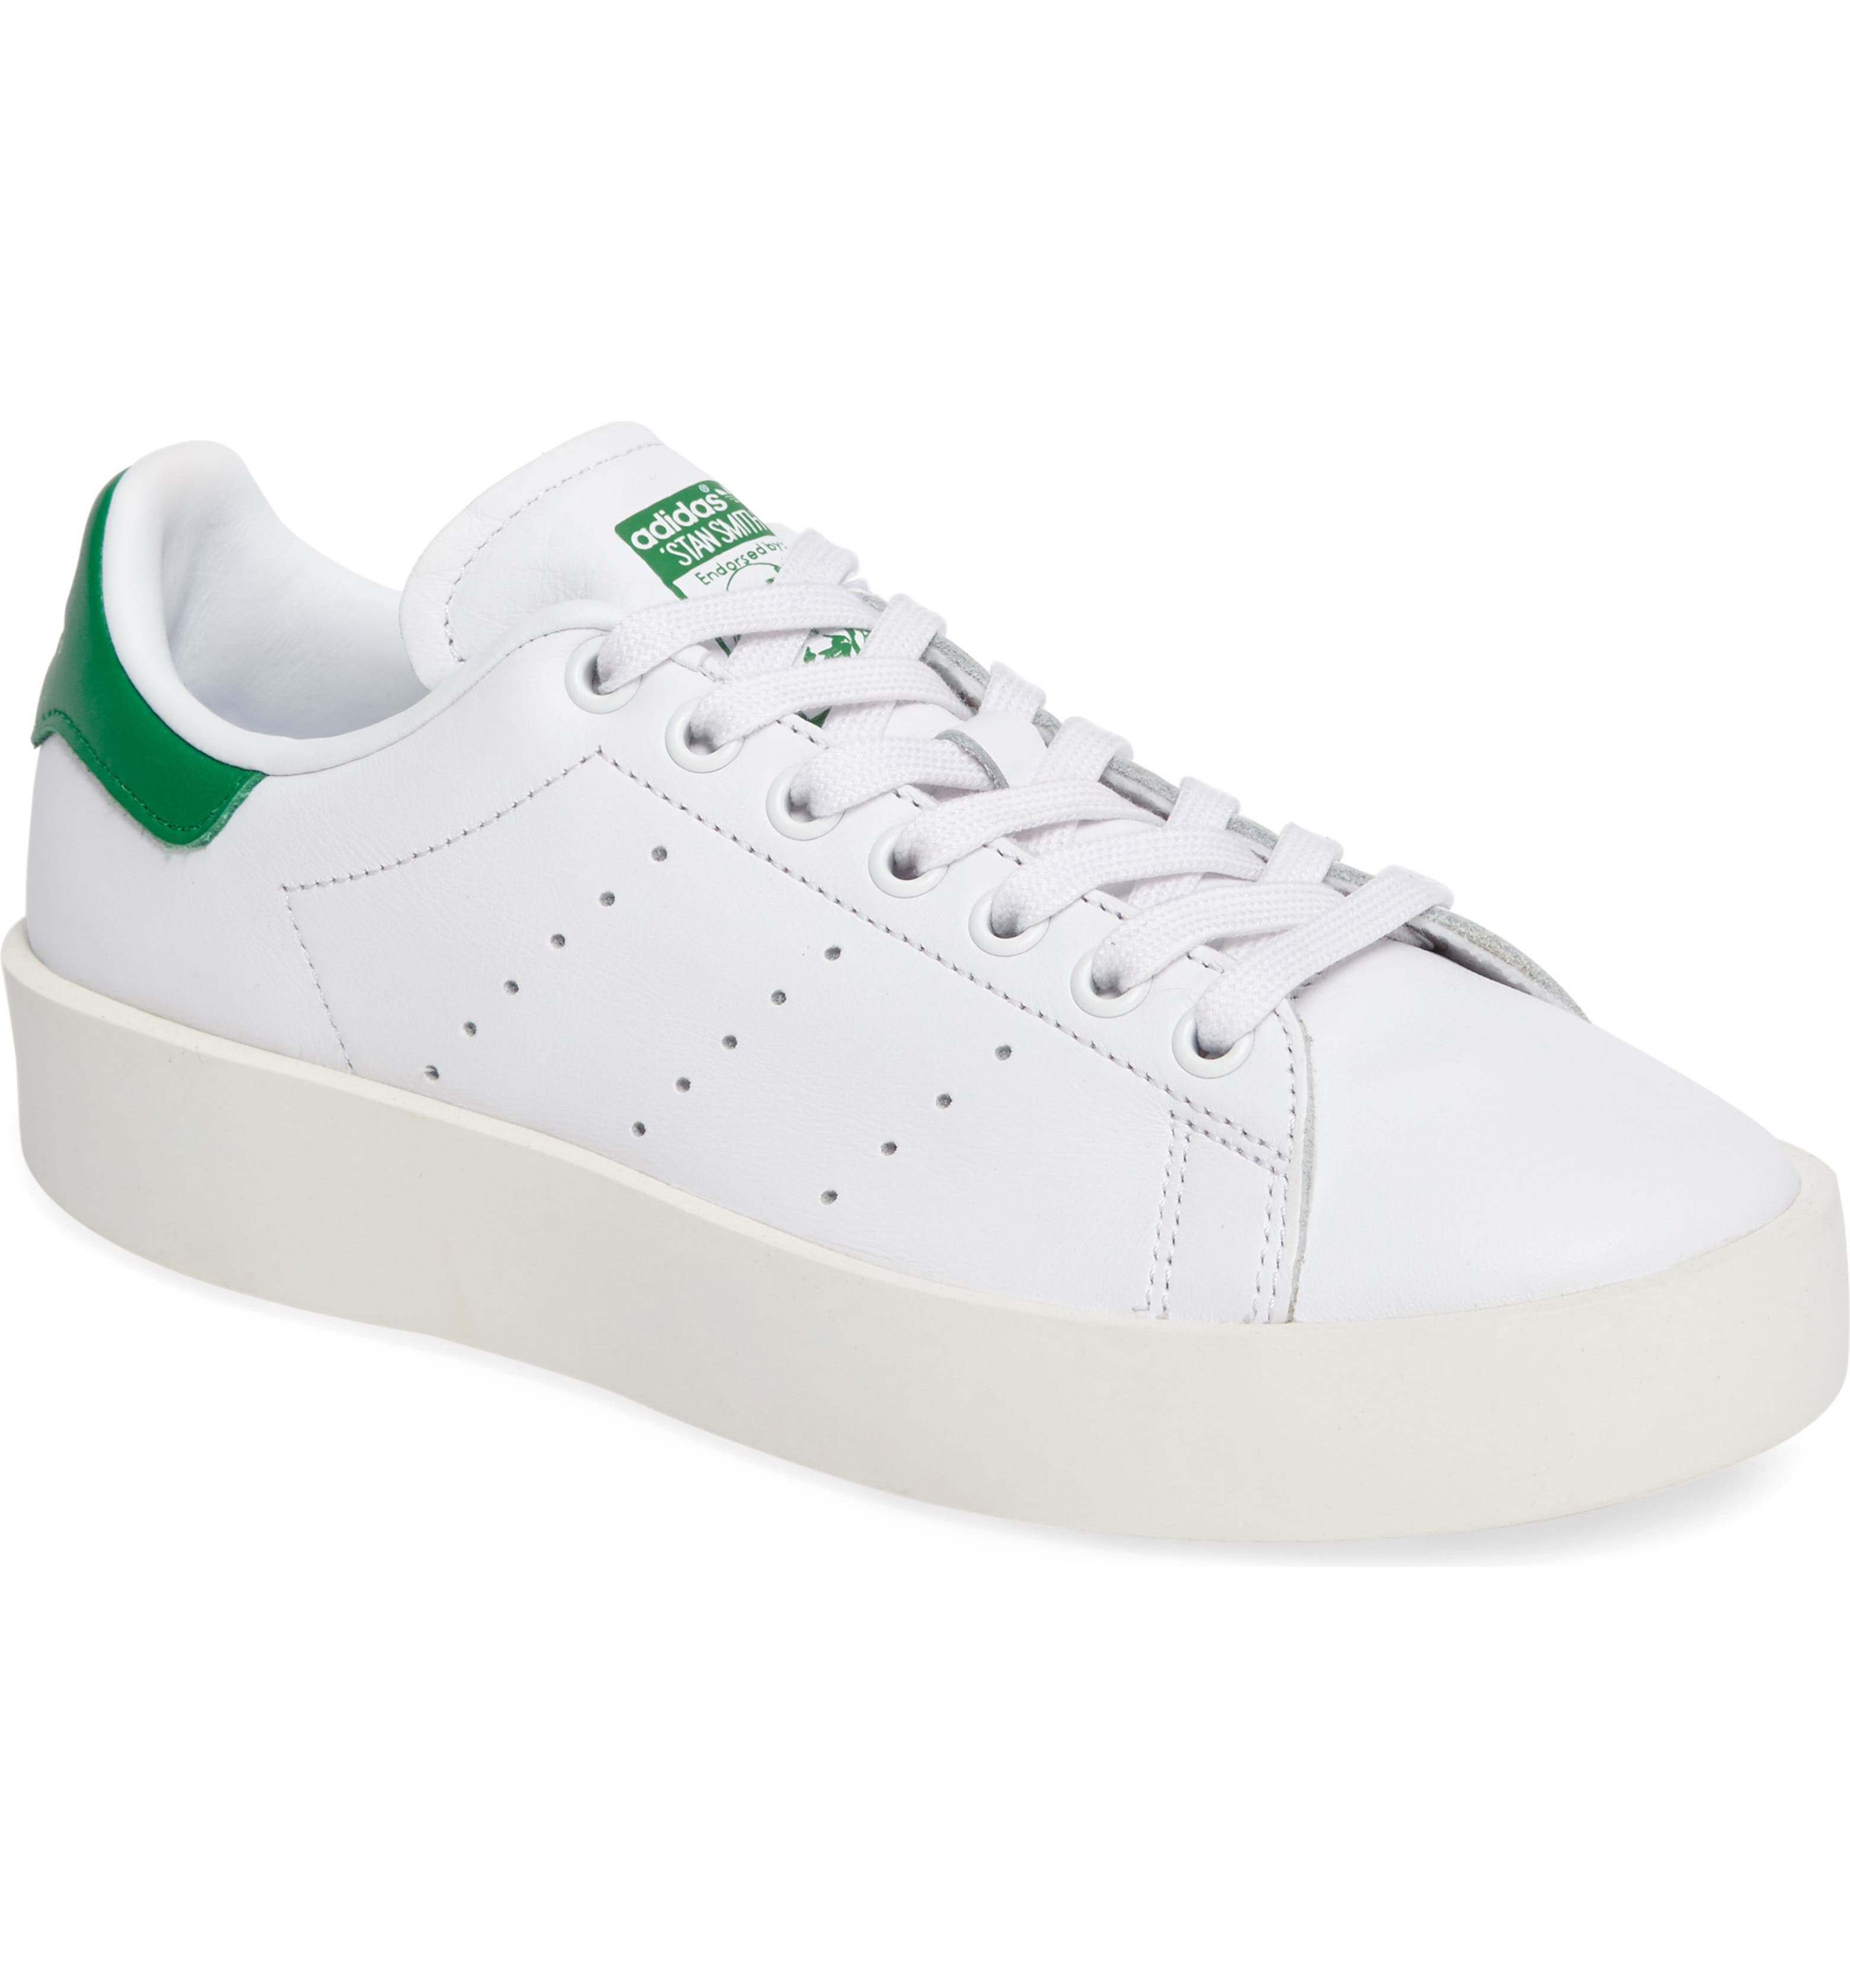 adidas stan smith for travel